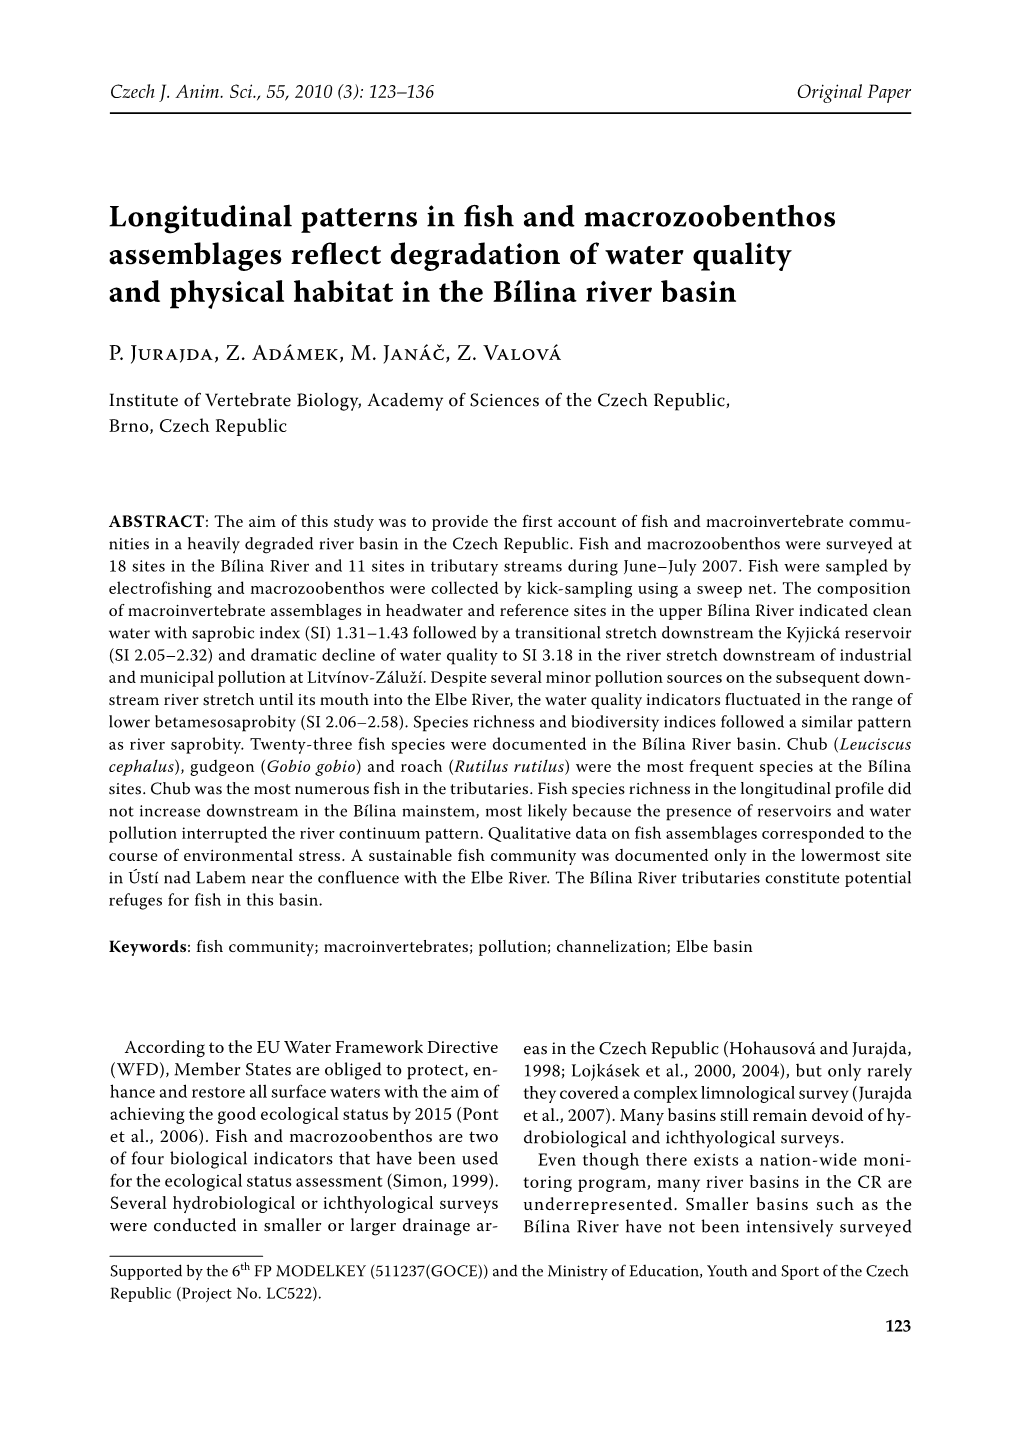 Longitudinal Patterns in Fish and Macrozoobenthos Assemblages Reflect Degradation of Water Quality and Physical Habitat in the Bílina River Basin